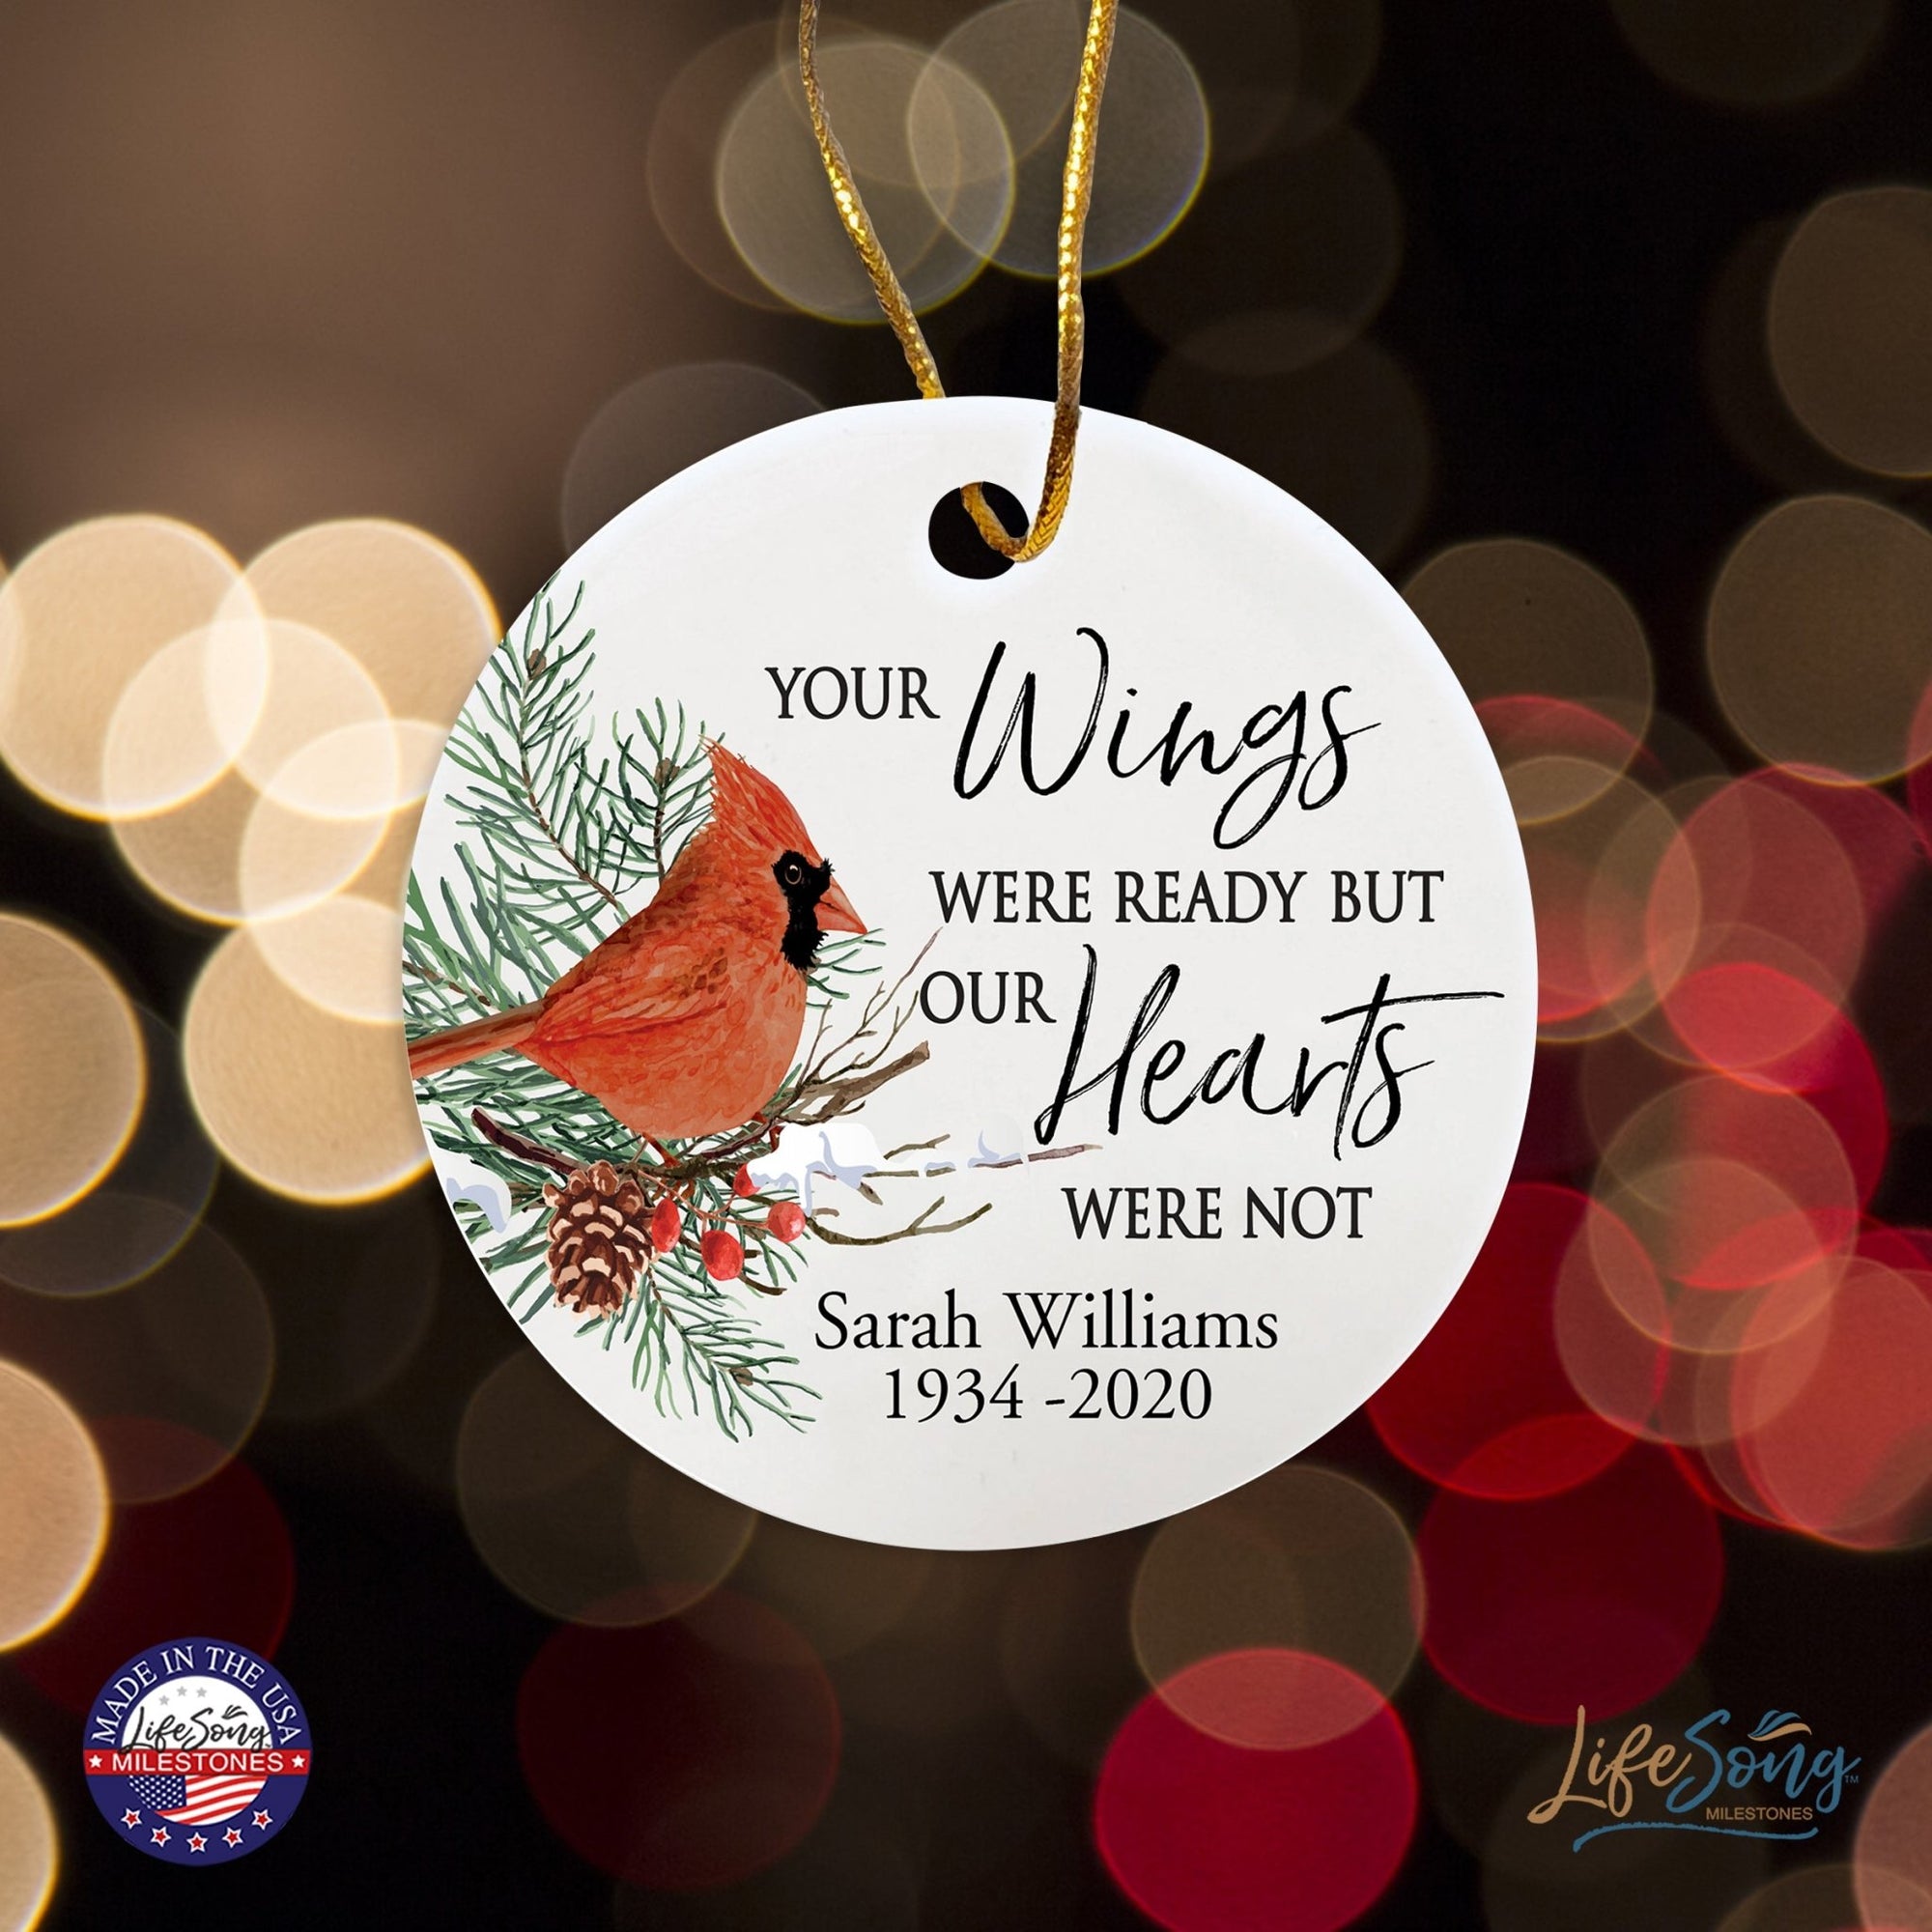 Custom Ceramic Christmas Memorial White Round Ornament 2.75in Your Wings Were Ready - LifeSong Milestones